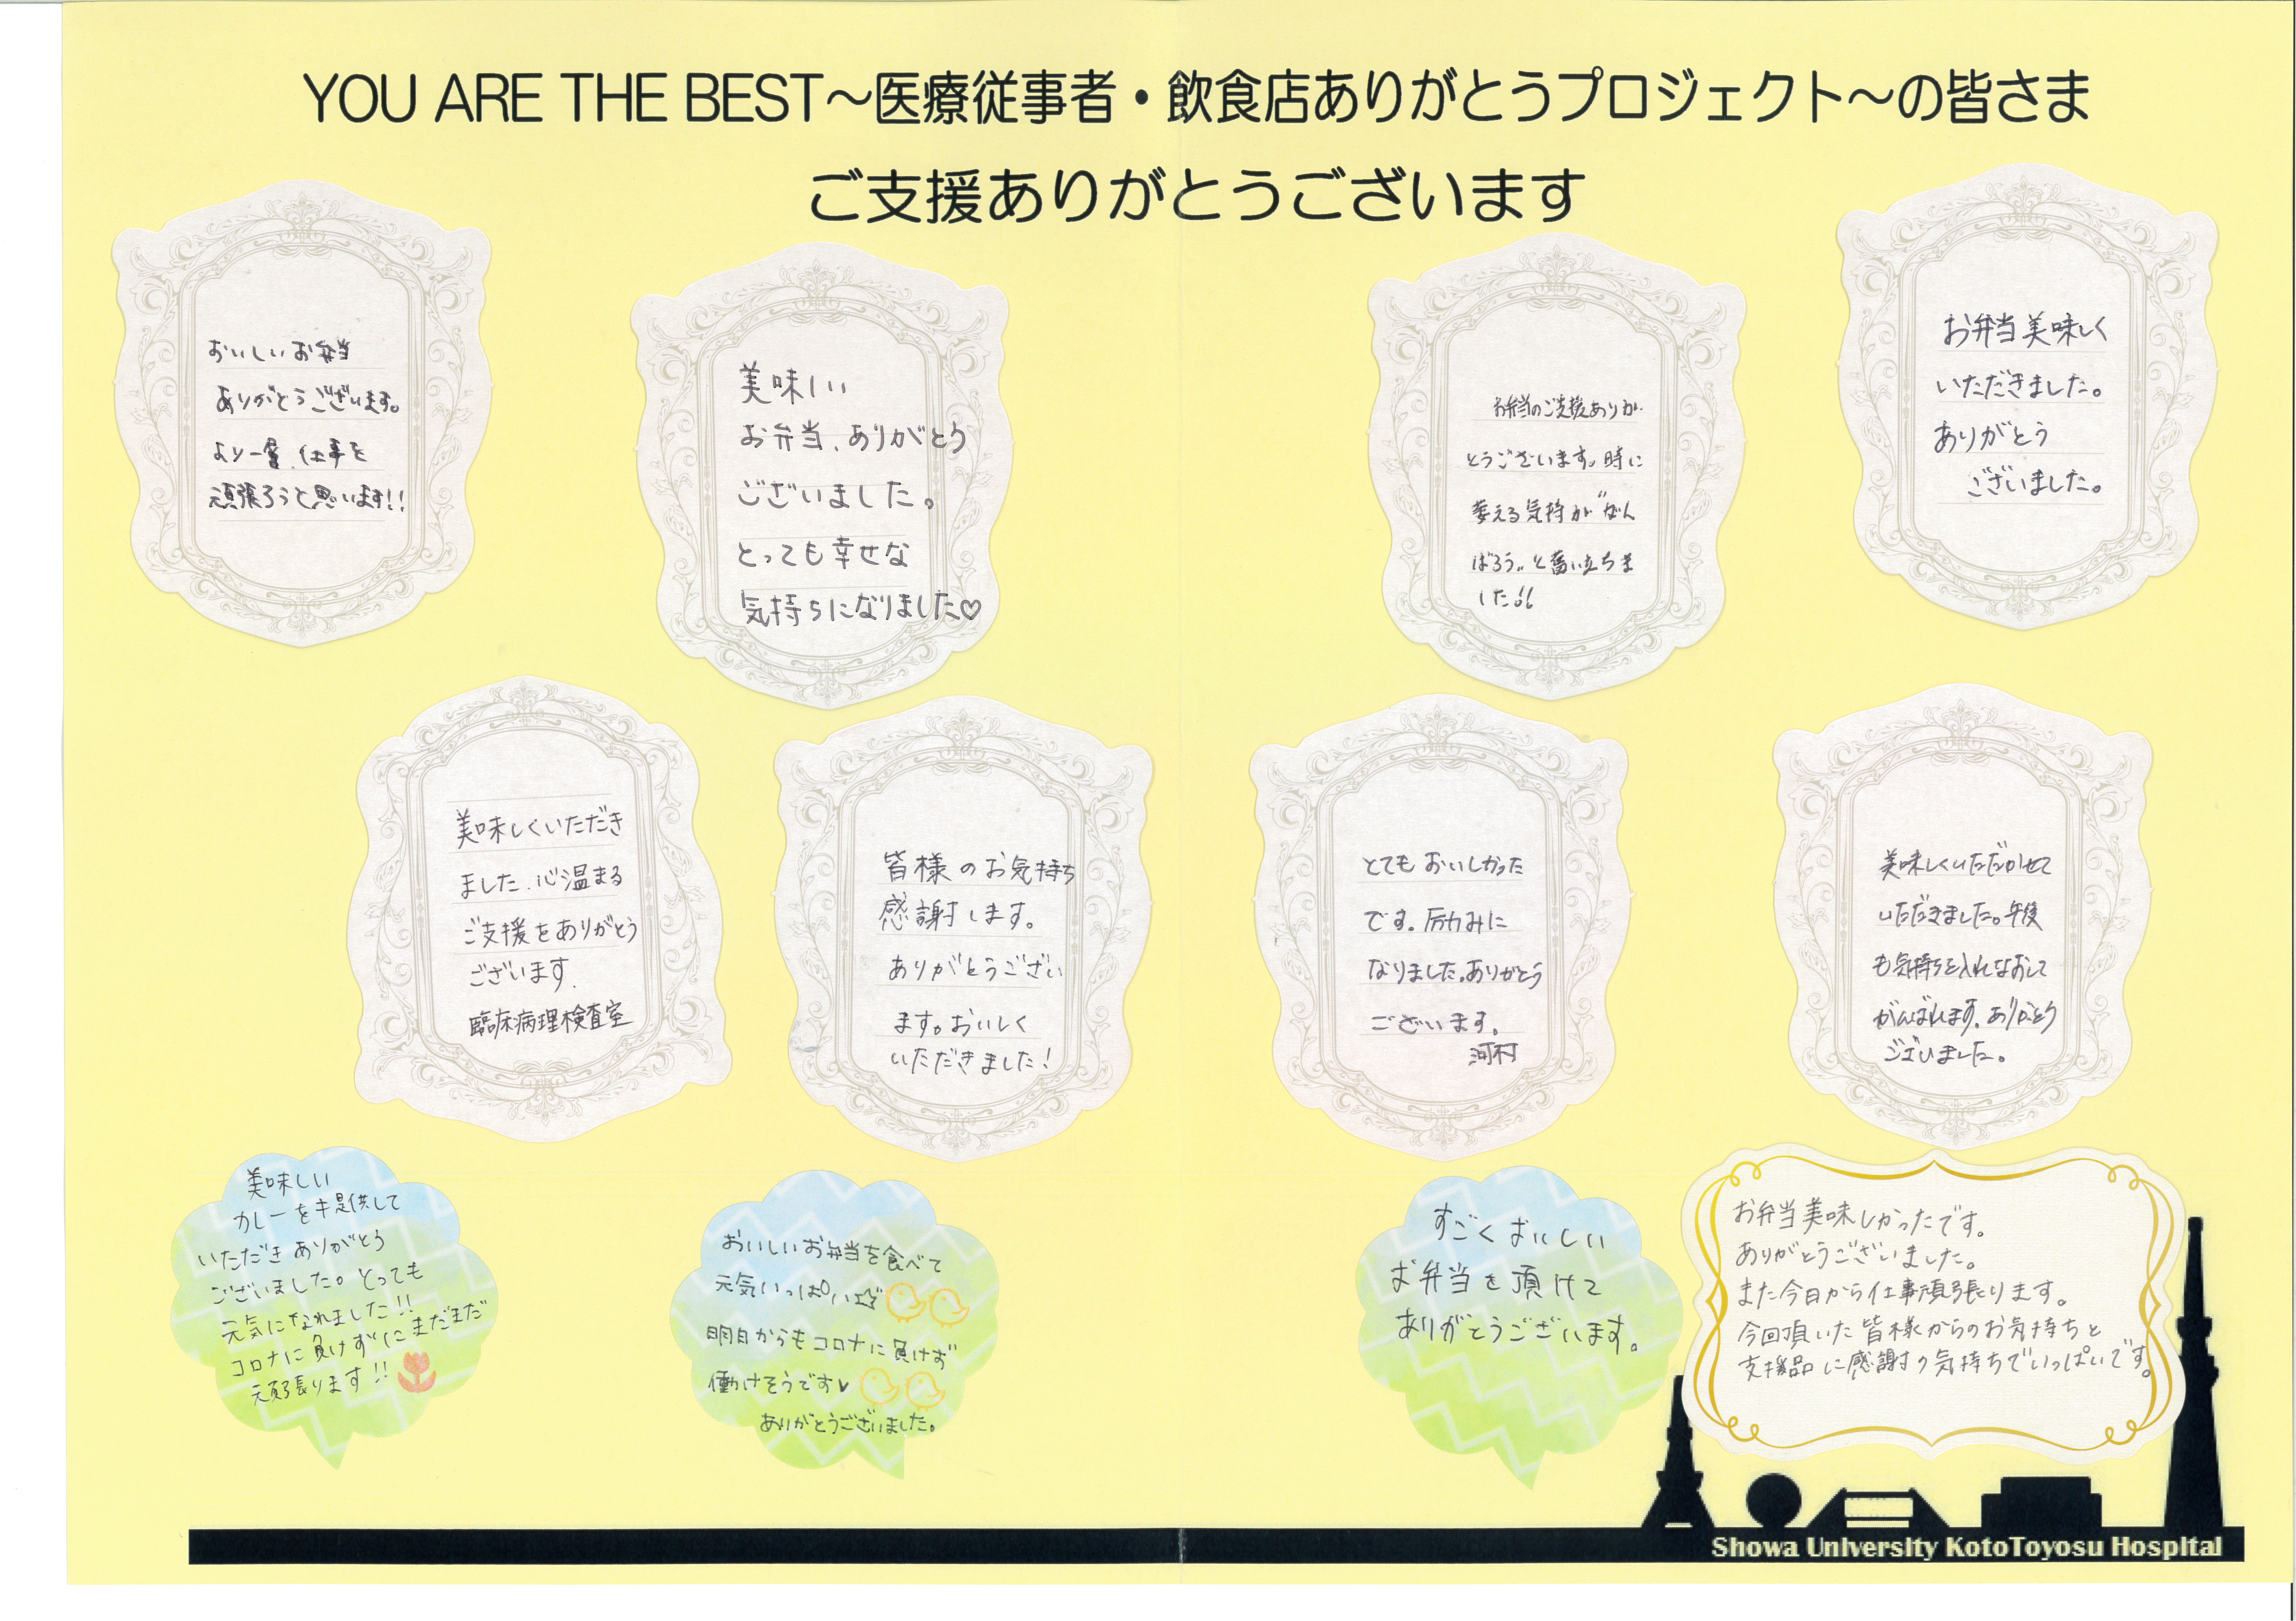 You Are The Best ユアベス 医療従事者 飲食店ありがとうプロジェクト Presented By 文化放送